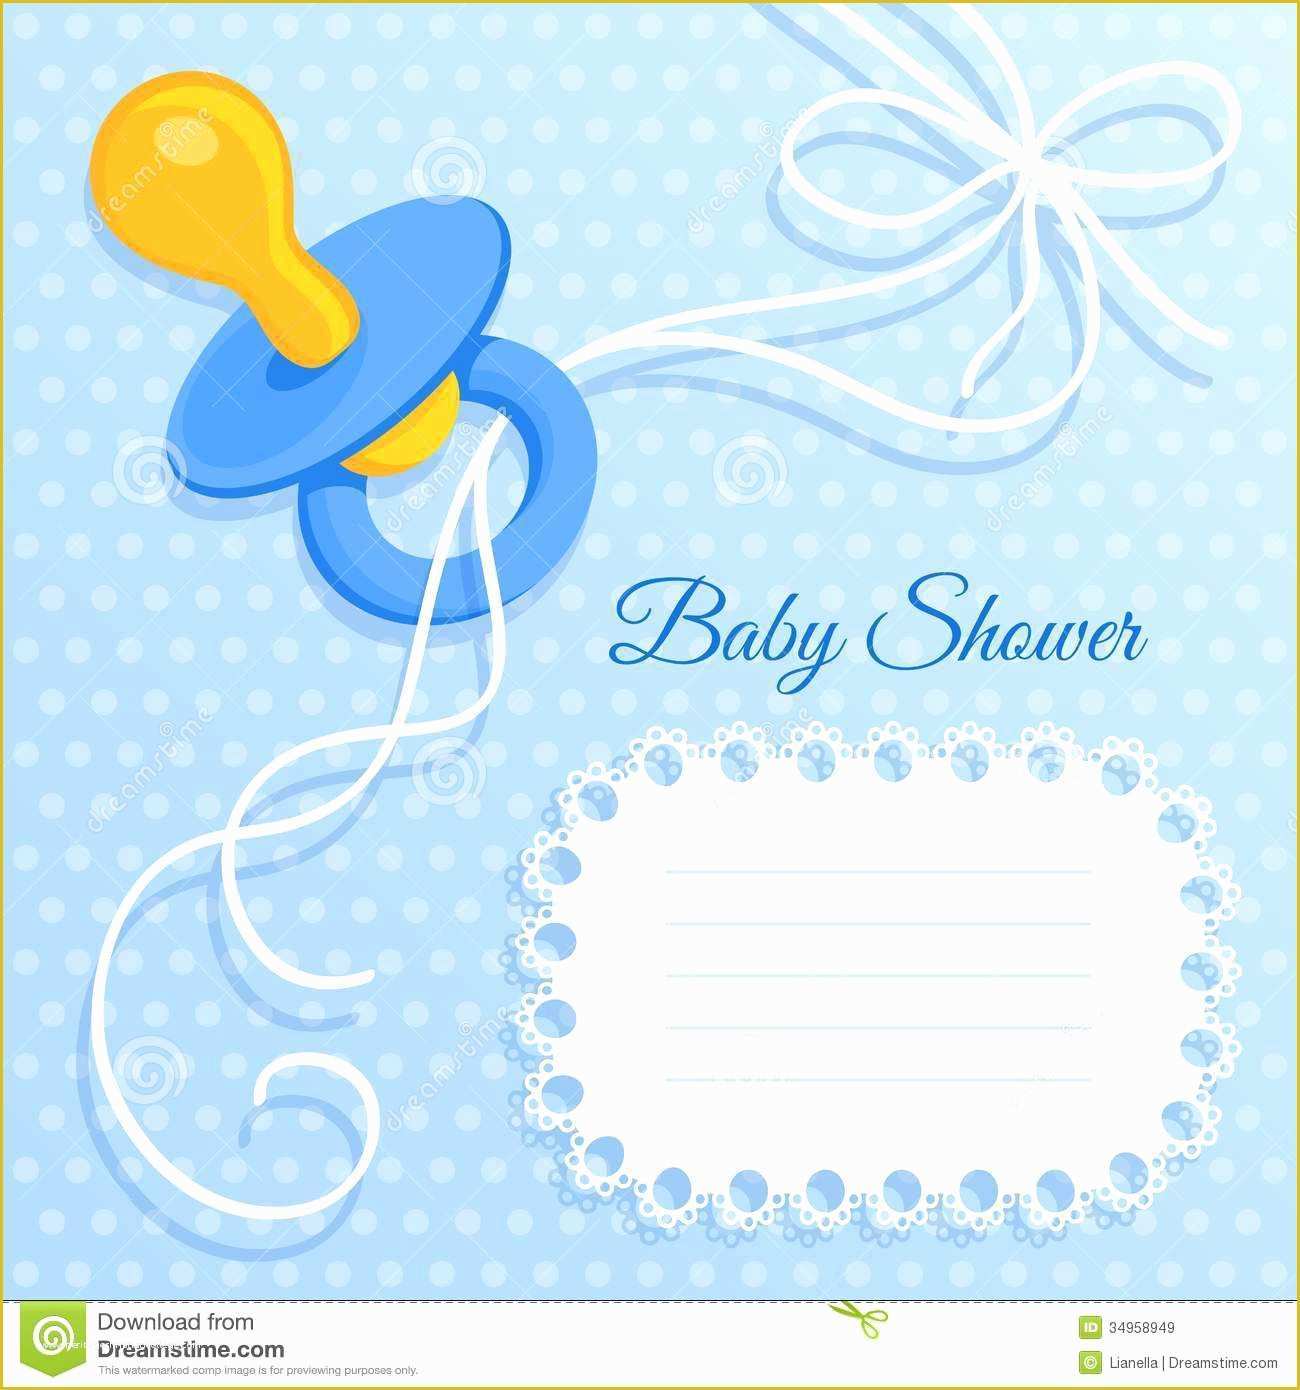 Free Printable Baby Shower Cards Templates Of Baby Shower Invitations Cards Designs Baby Shower